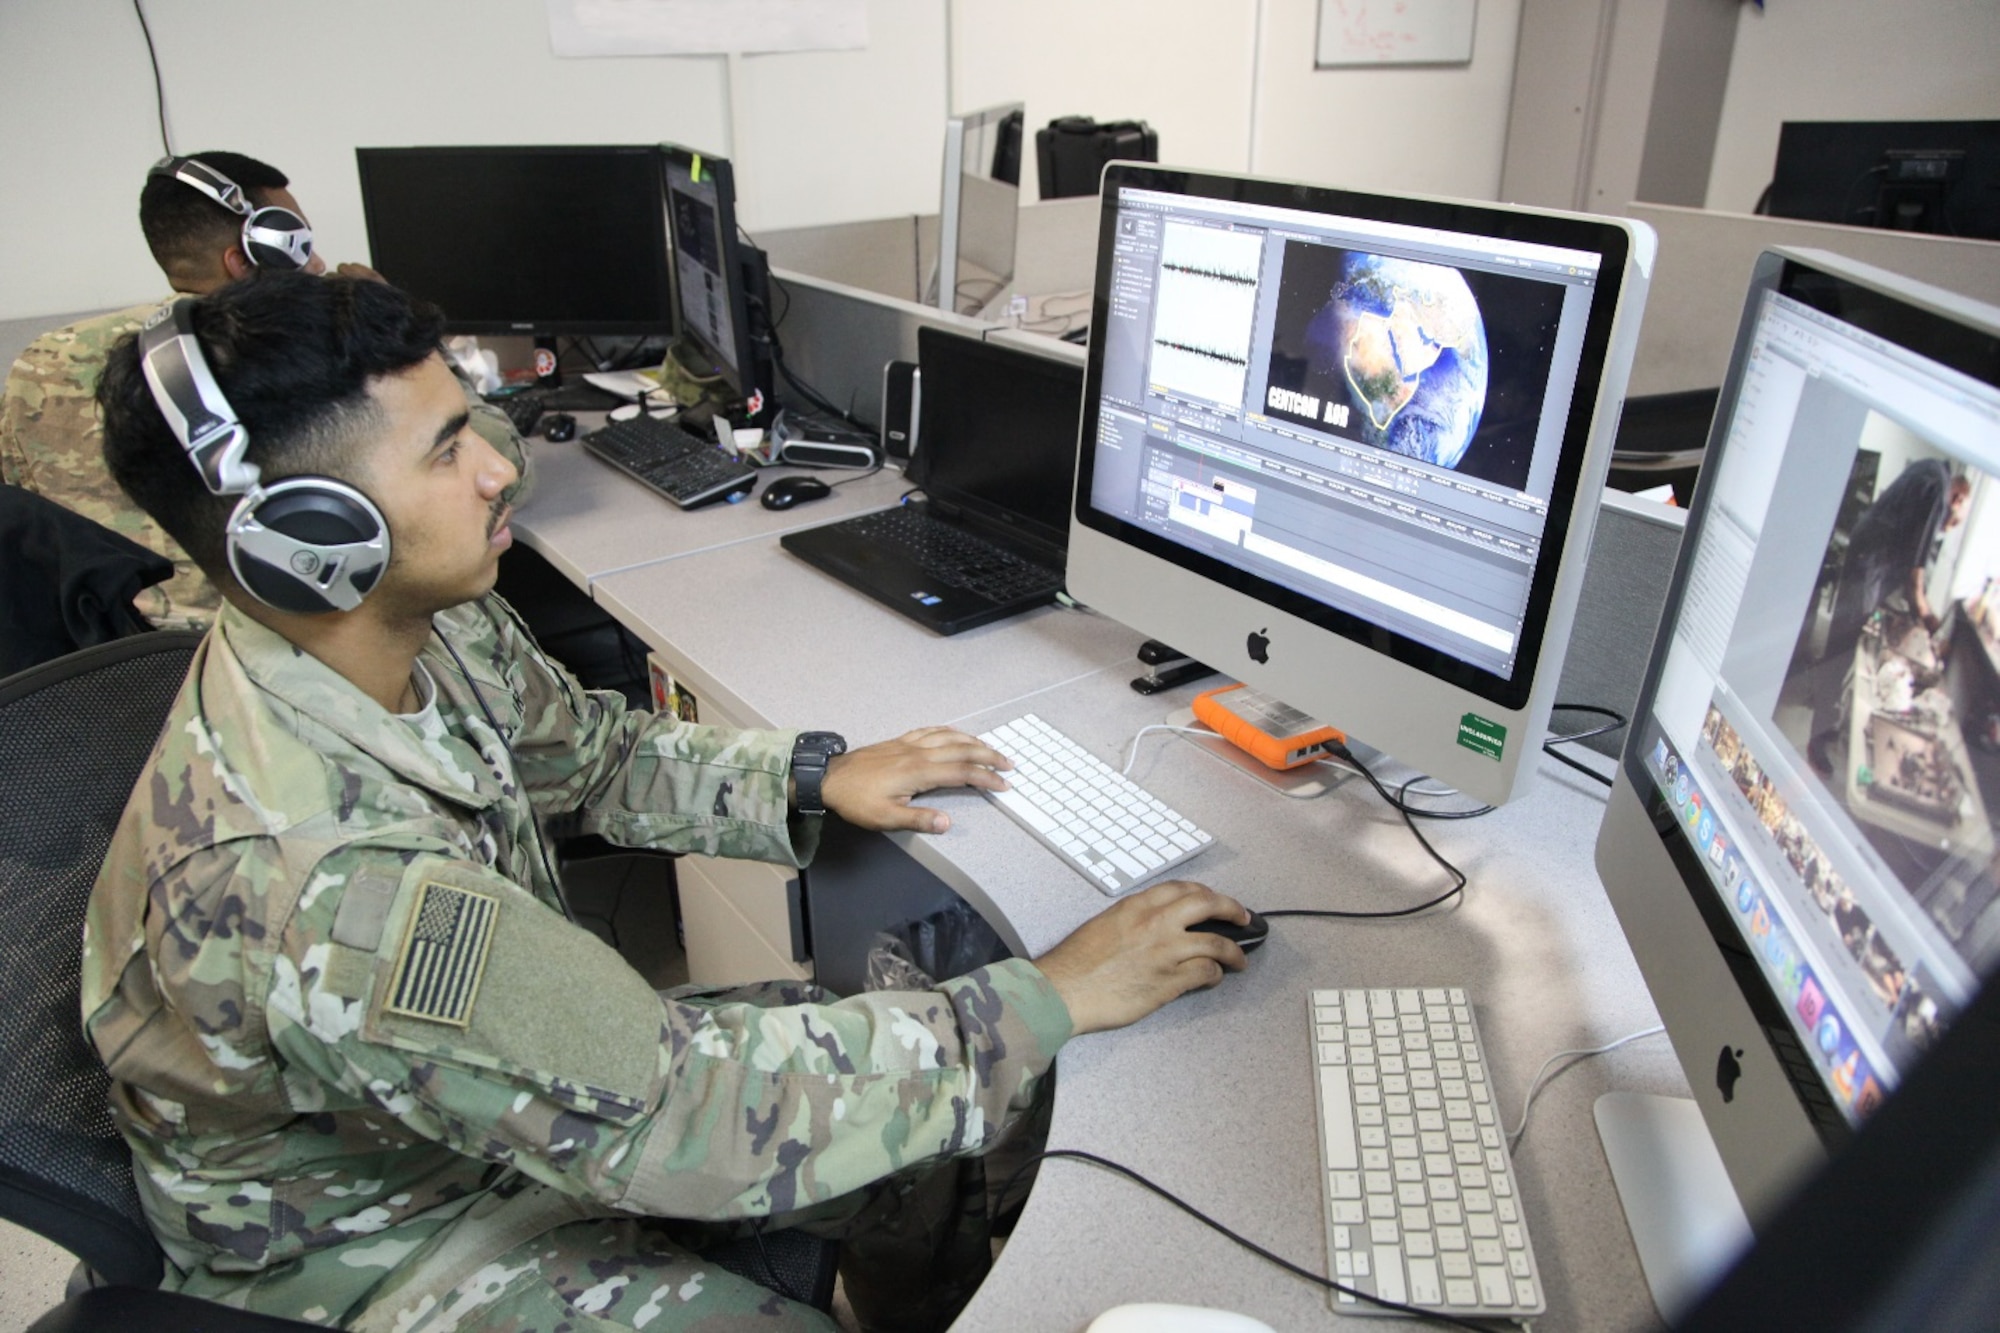 U.S. Army Spc. Jose edits a video on Feb. 9, 2017 at the Military Information Support Task Force-Central (MISTF-C) Headquarters on Al Udeid Air Base, Qatar. Jose is assigned to the Production Development Detachment within the MISTF-C. (U.S. Army photo by Staff Sgt. Brian)